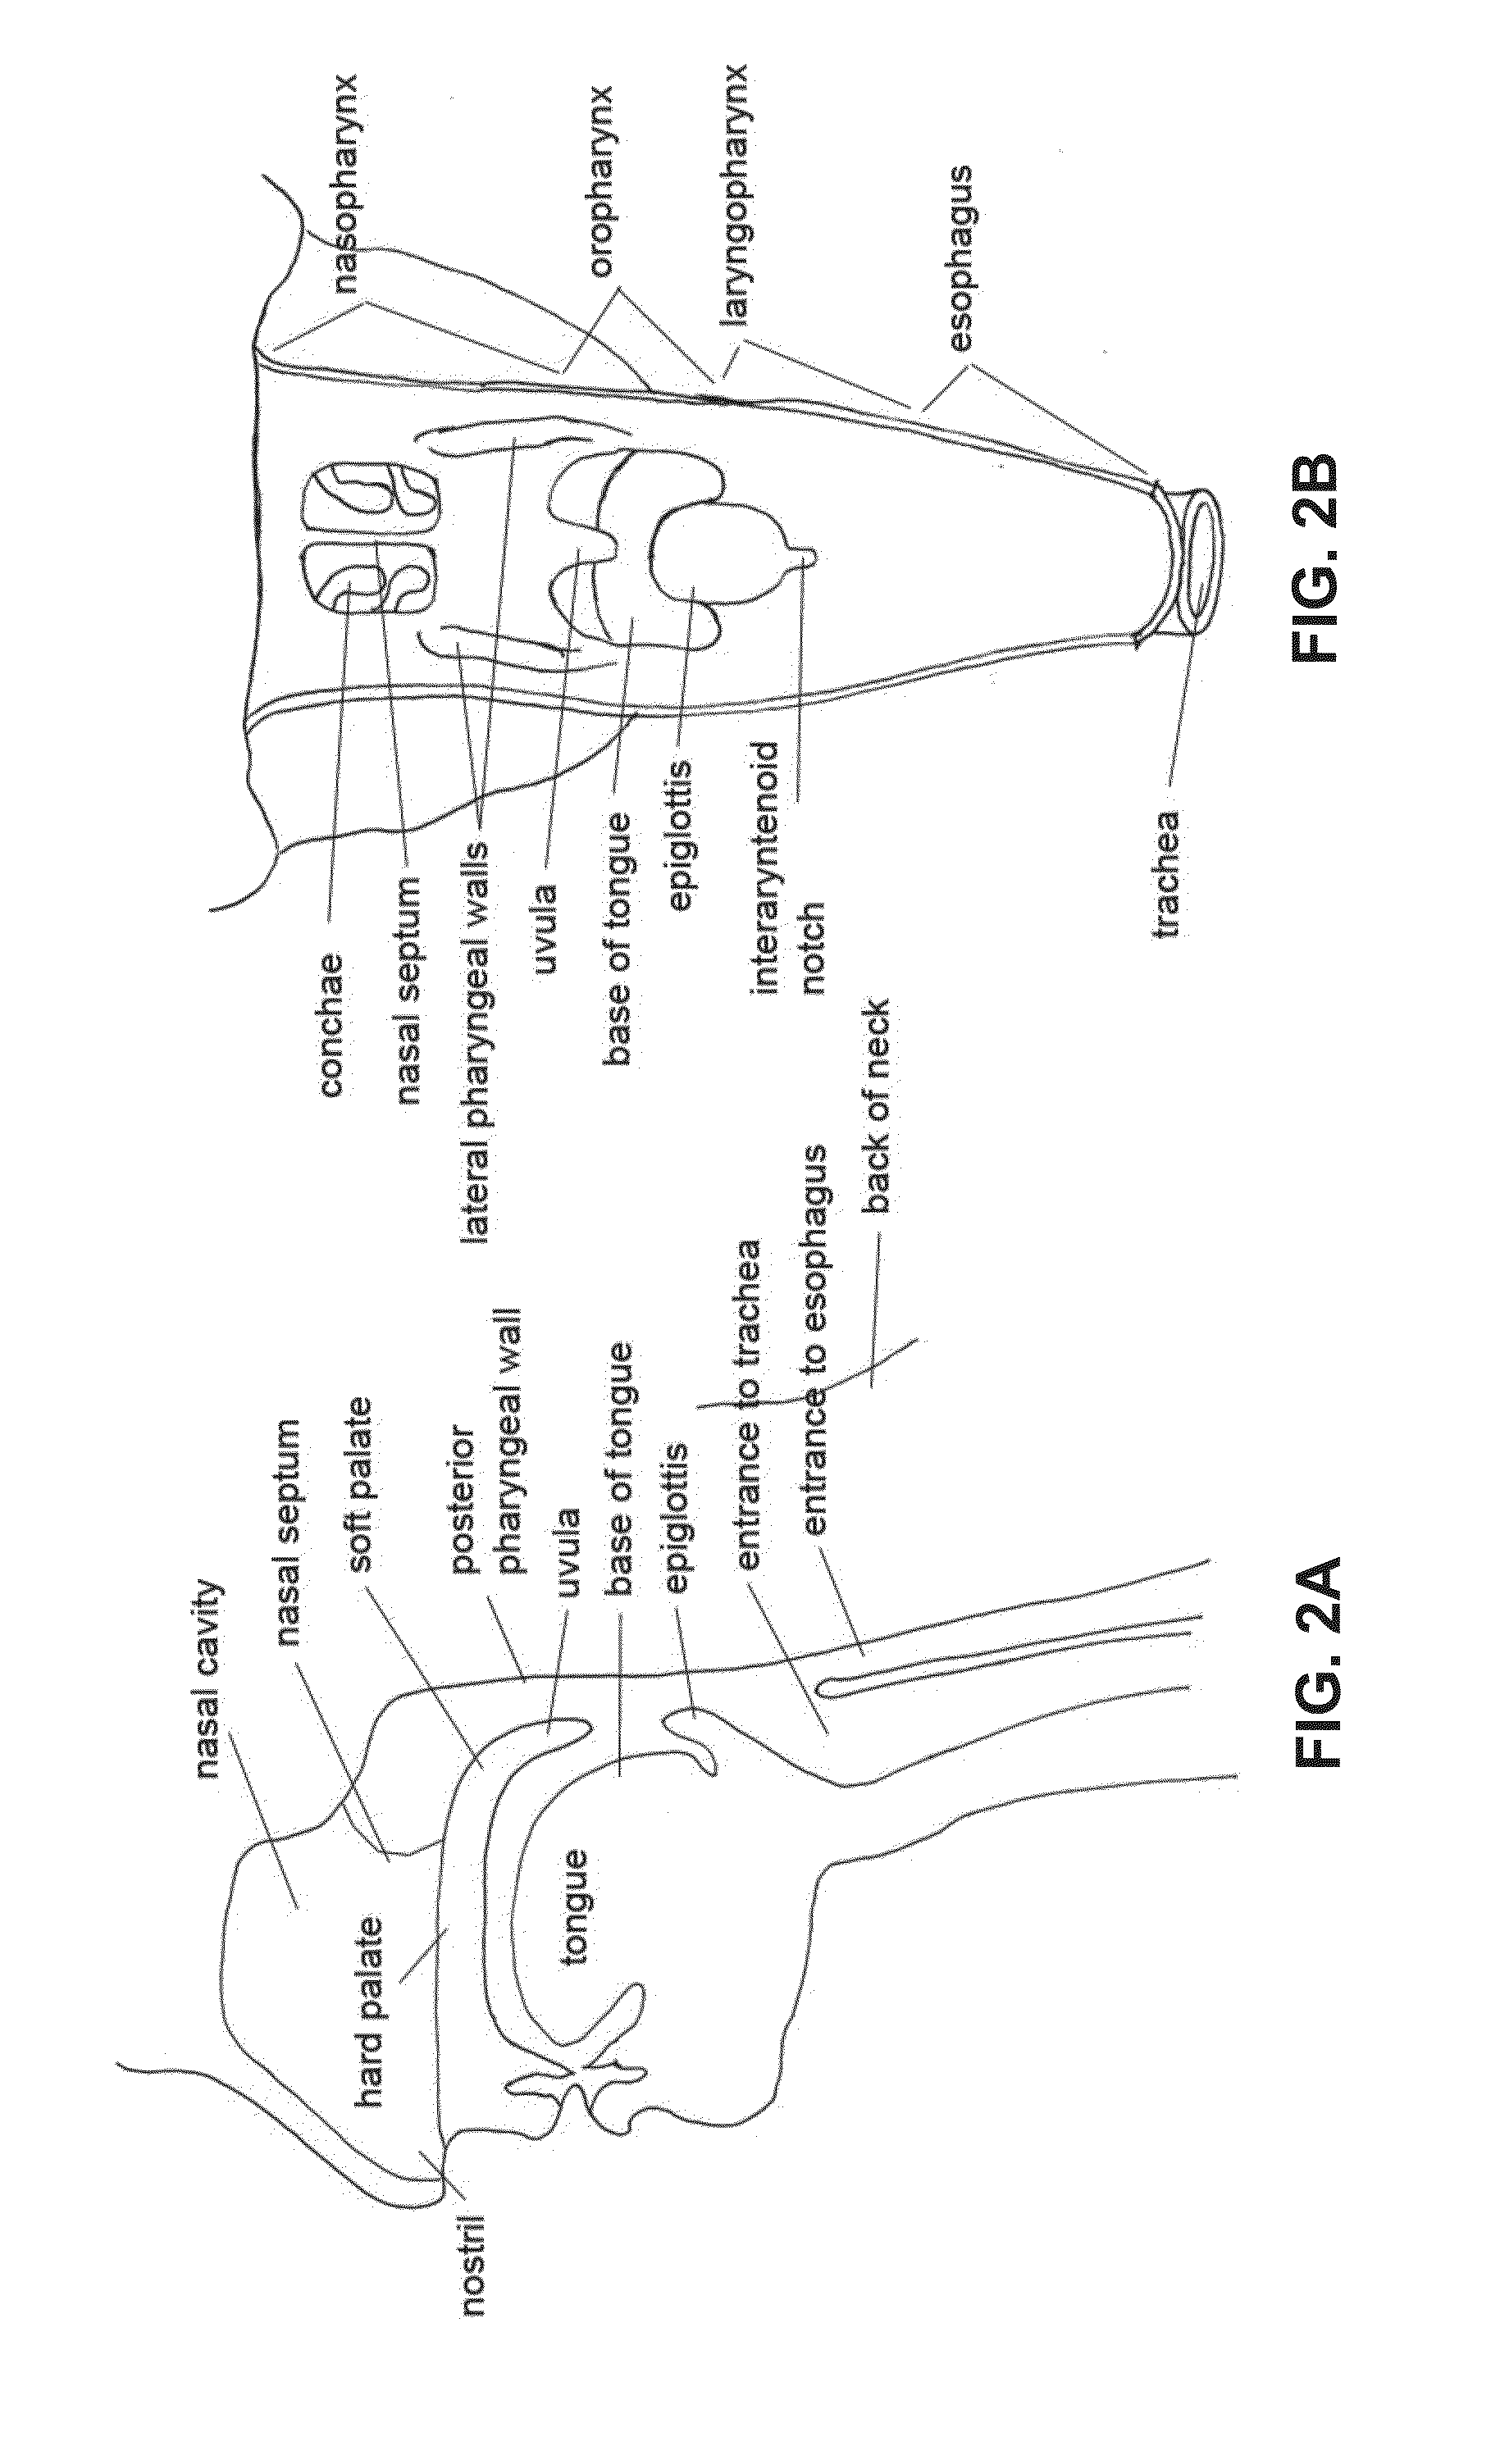 Devices and methods for treating sleep disordered breathing